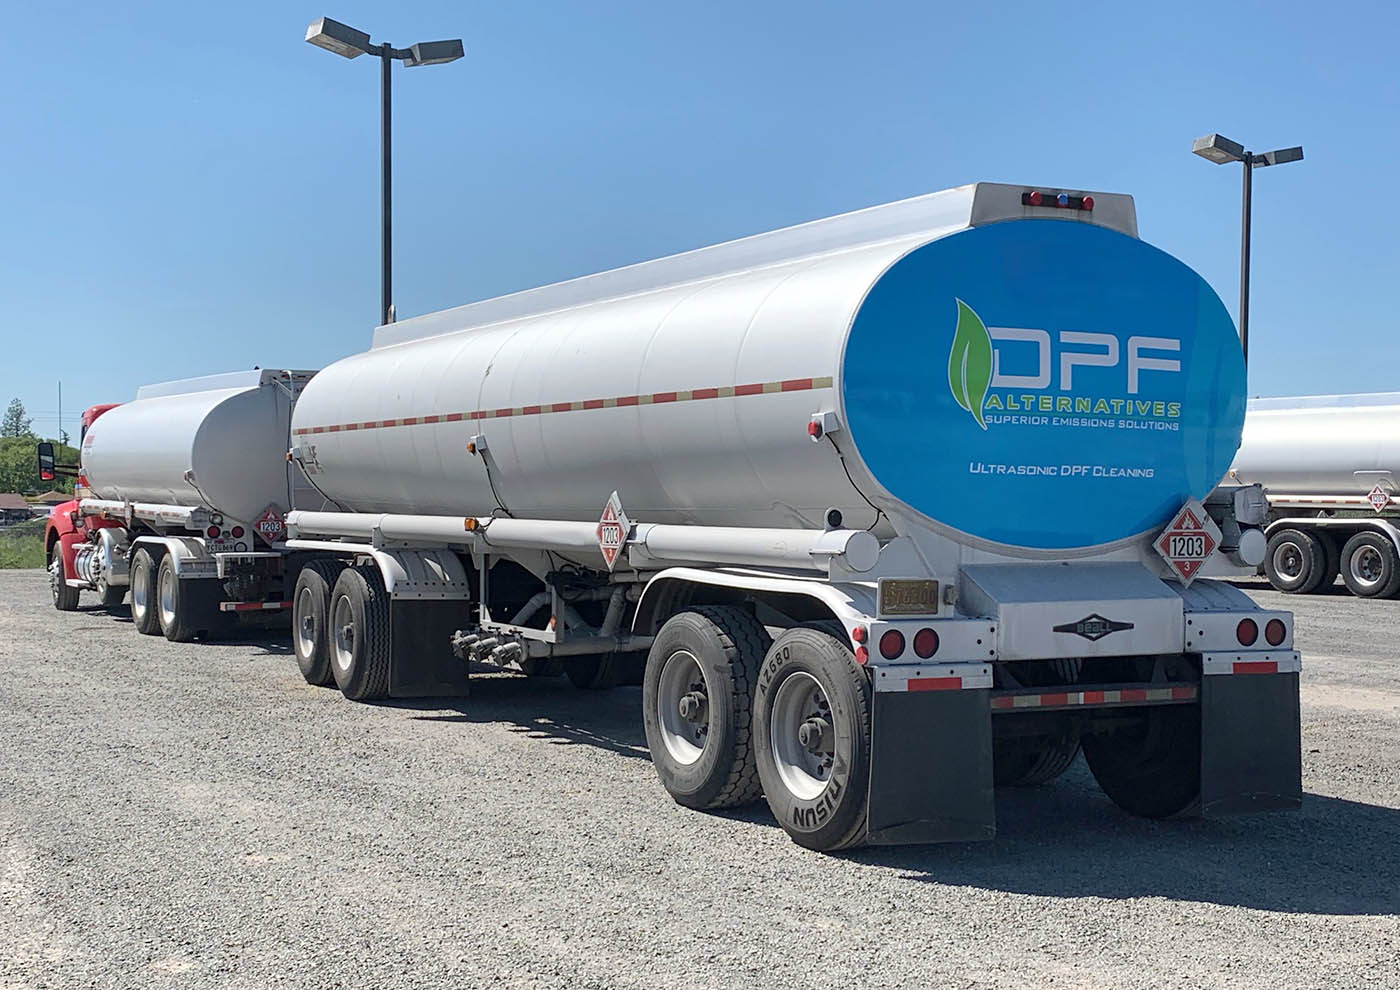 Back of a clean, large, reflective semi truck rig, contact DPF Alternatives for a DPF cleaning in Lubbock.